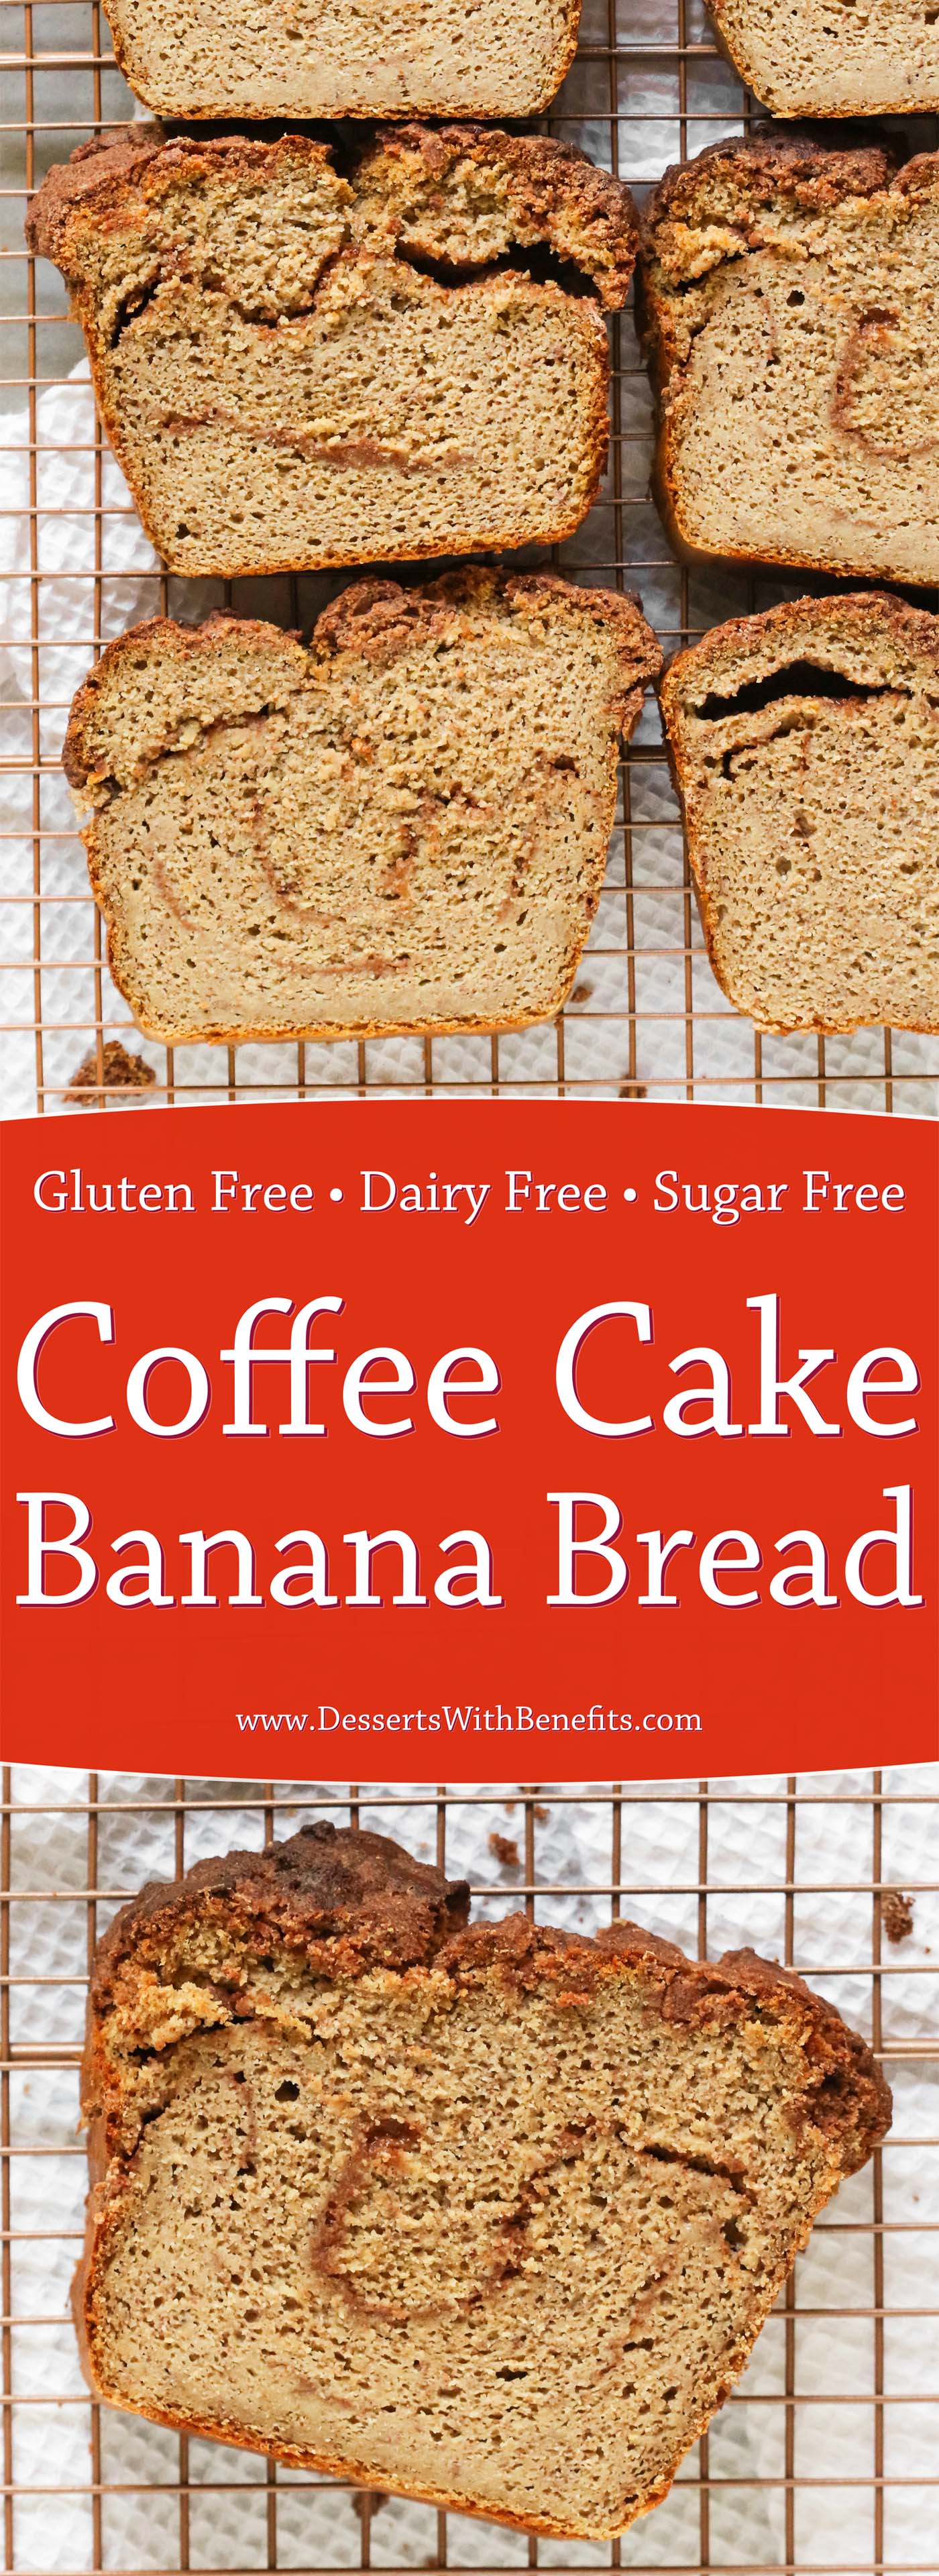 This super moist Coffee Cake Banana Bread is two classic breakfast treats mixed into one, and made healthy, high protein, high fiber, gluten free, dairy free, and sugar free too!